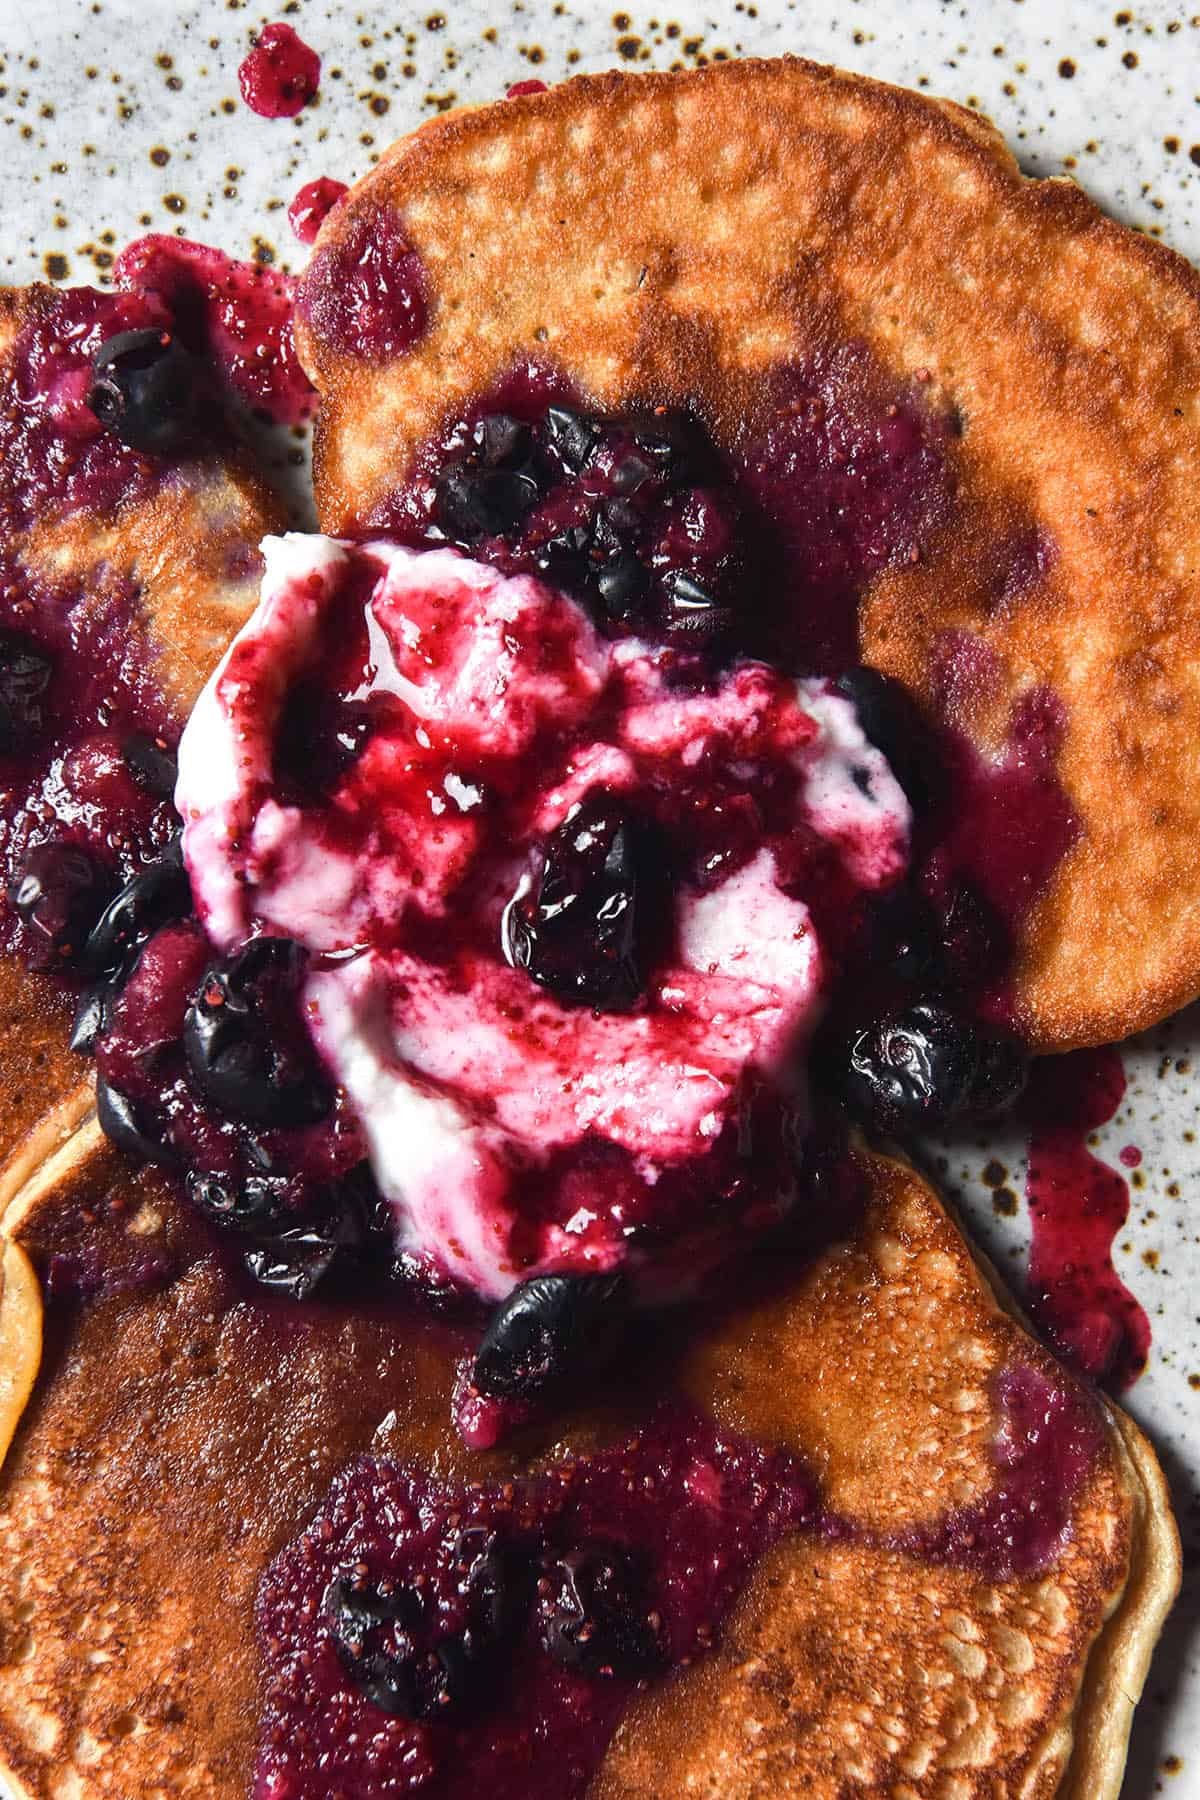 An aerial close up view of banana protein pancakes smothered in coconut yoghurt and blueberry compote. The compote mixes with the yoghurt to create a pink and purple marbled effect